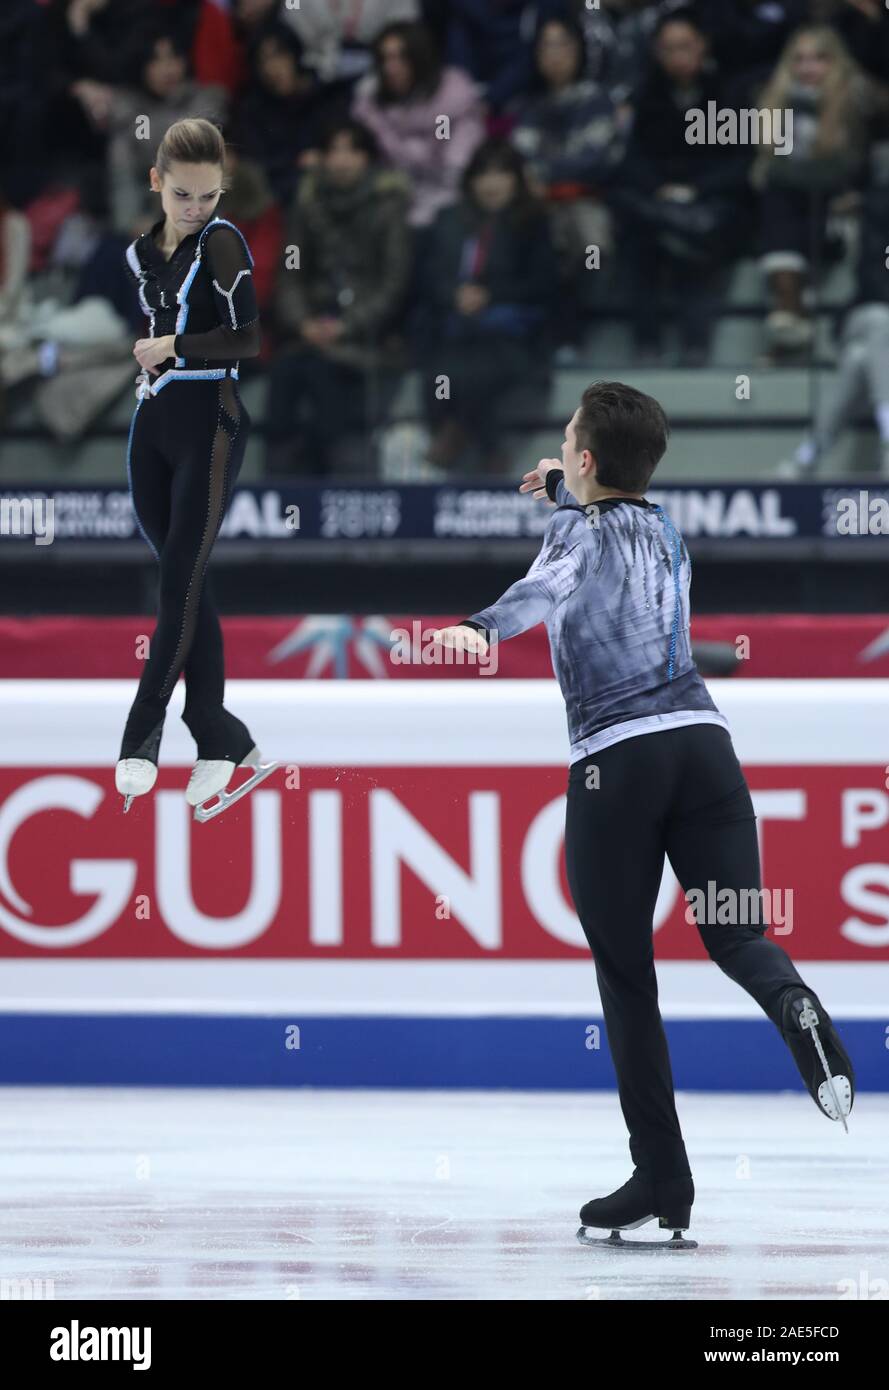 Turin, Italy. 6th Dec, 2019. Daria Pavliuchenko (L)/Denis Khodykin of Russia compete during the pairs free skating at the ISU Grand Prix of Figure Skating Final 2019 in Turin, Italy, Dec. 6, 2019. Credit: Cheng Tingting/Xinhua/Alamy Live News Stock Photo